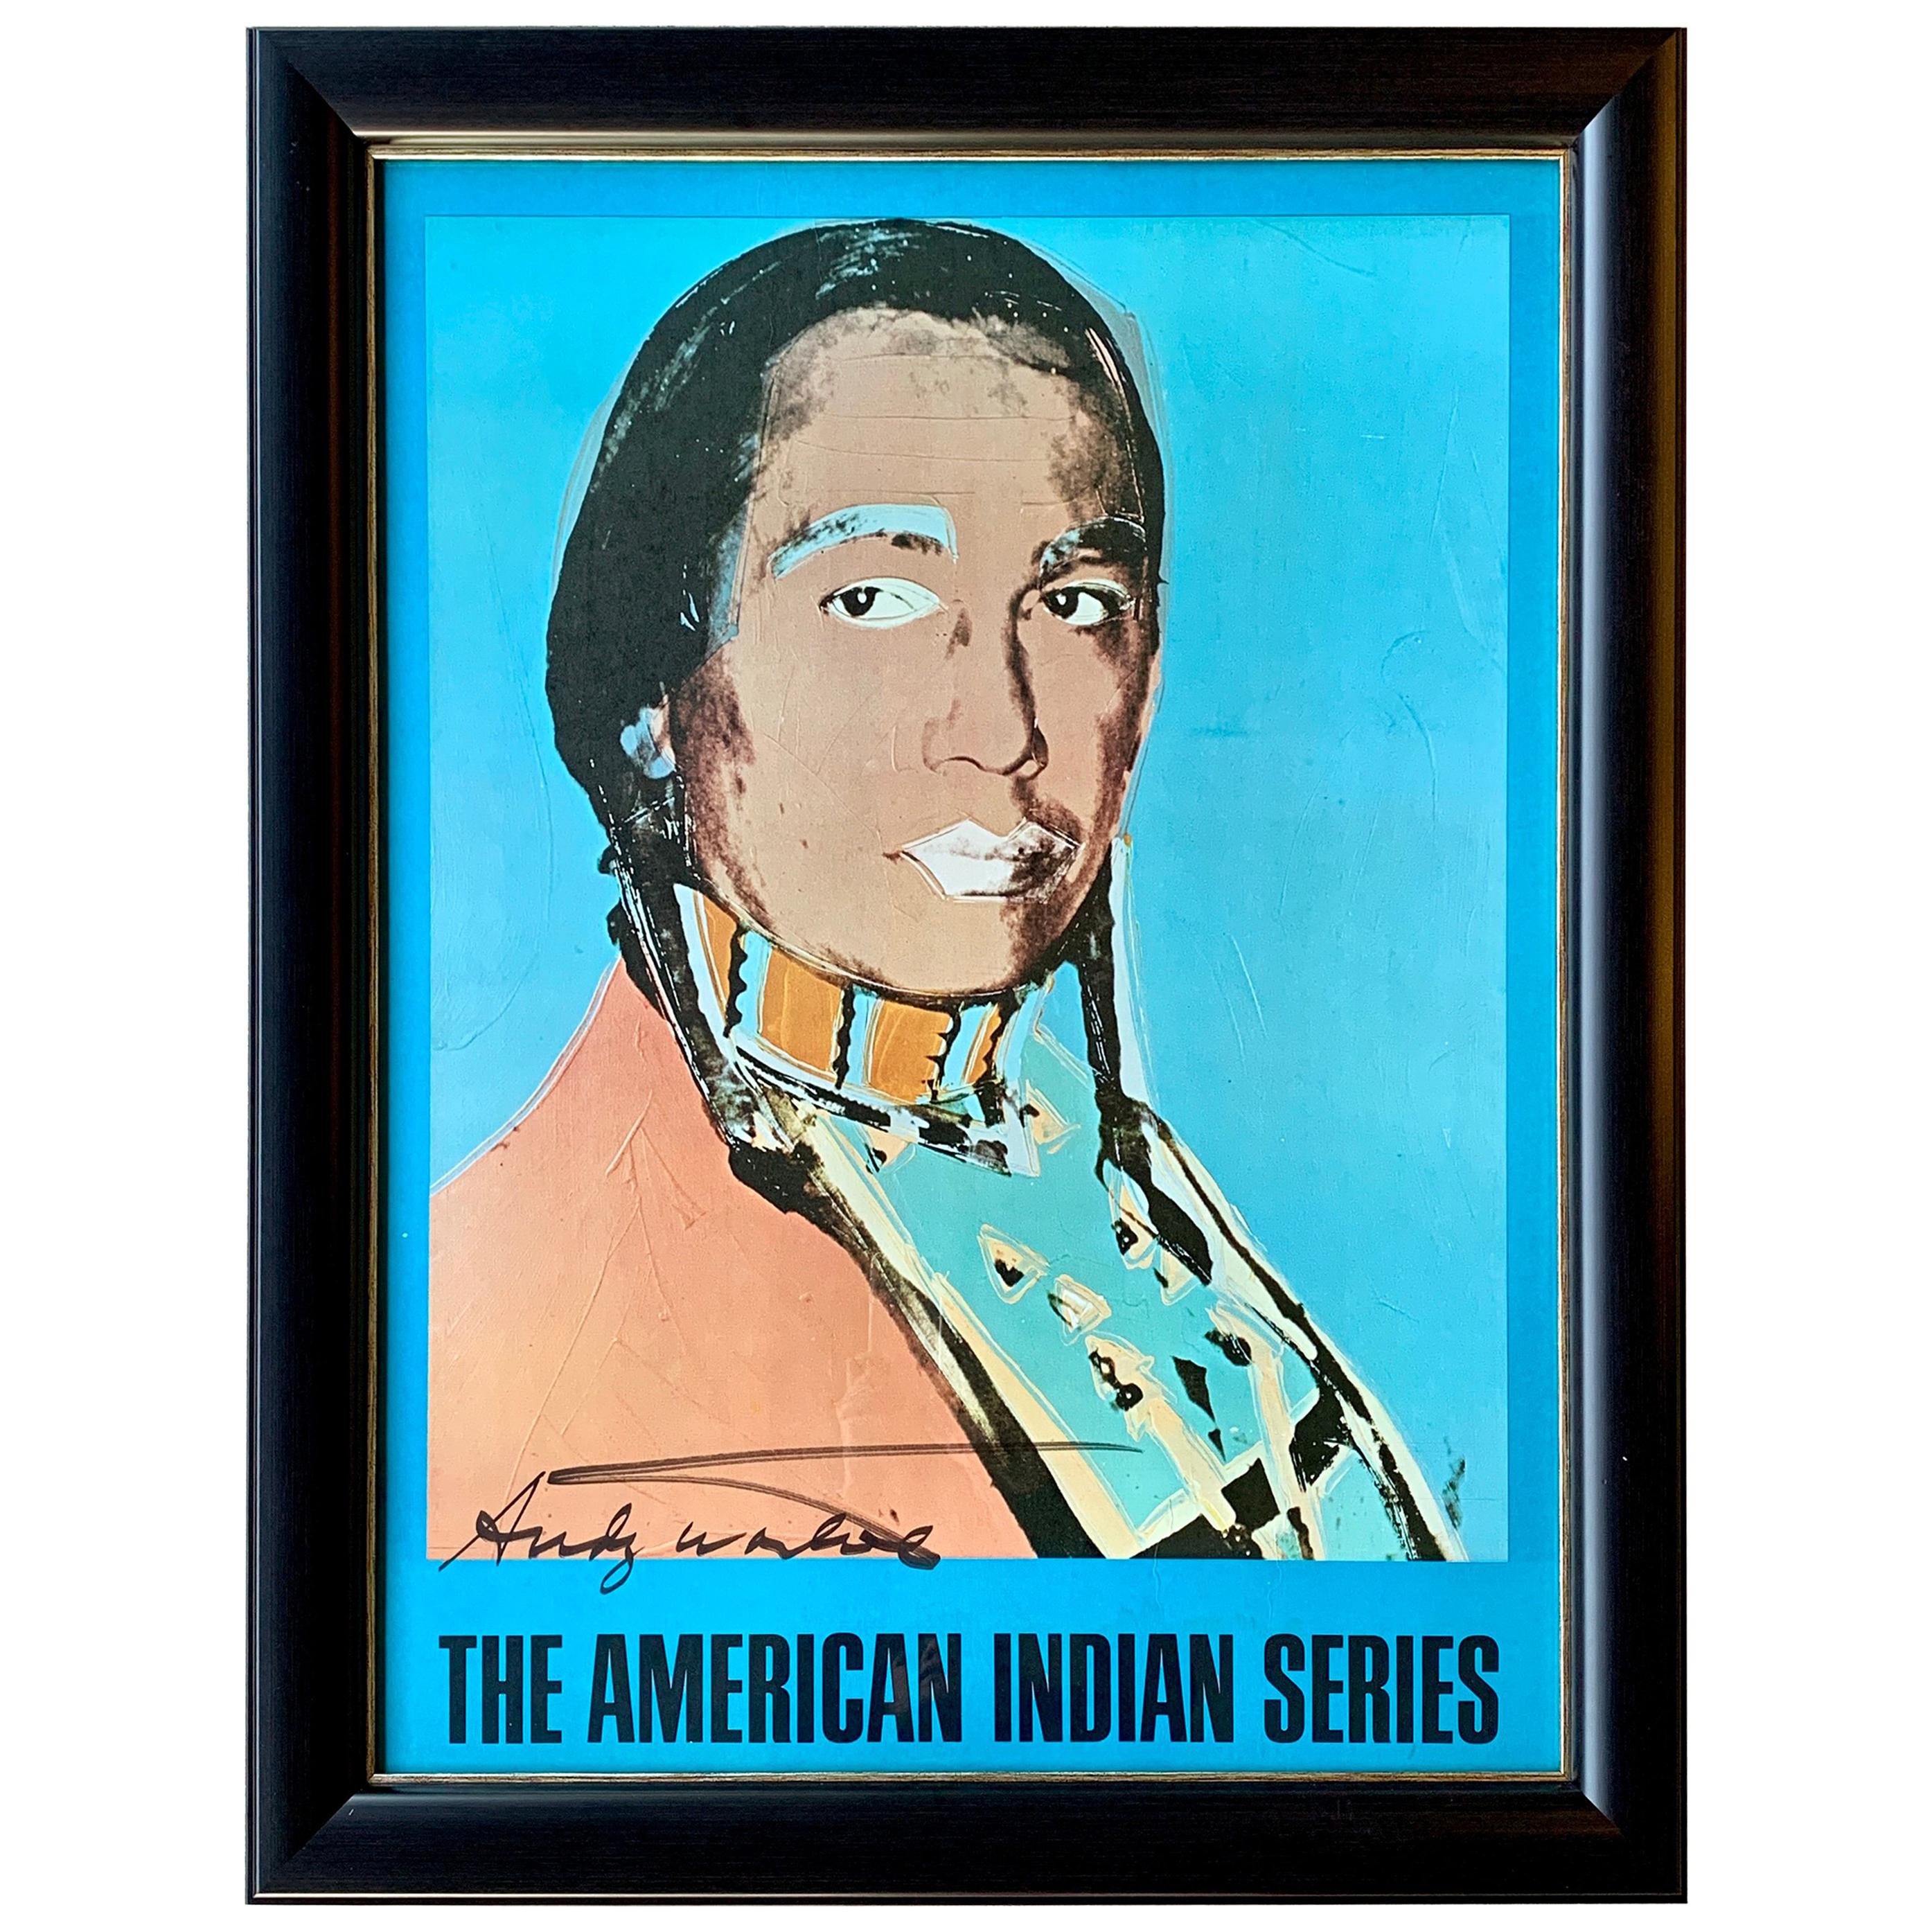 Authentic Andy Warhol Signed Poster 'The American Indian Series' Russell Means